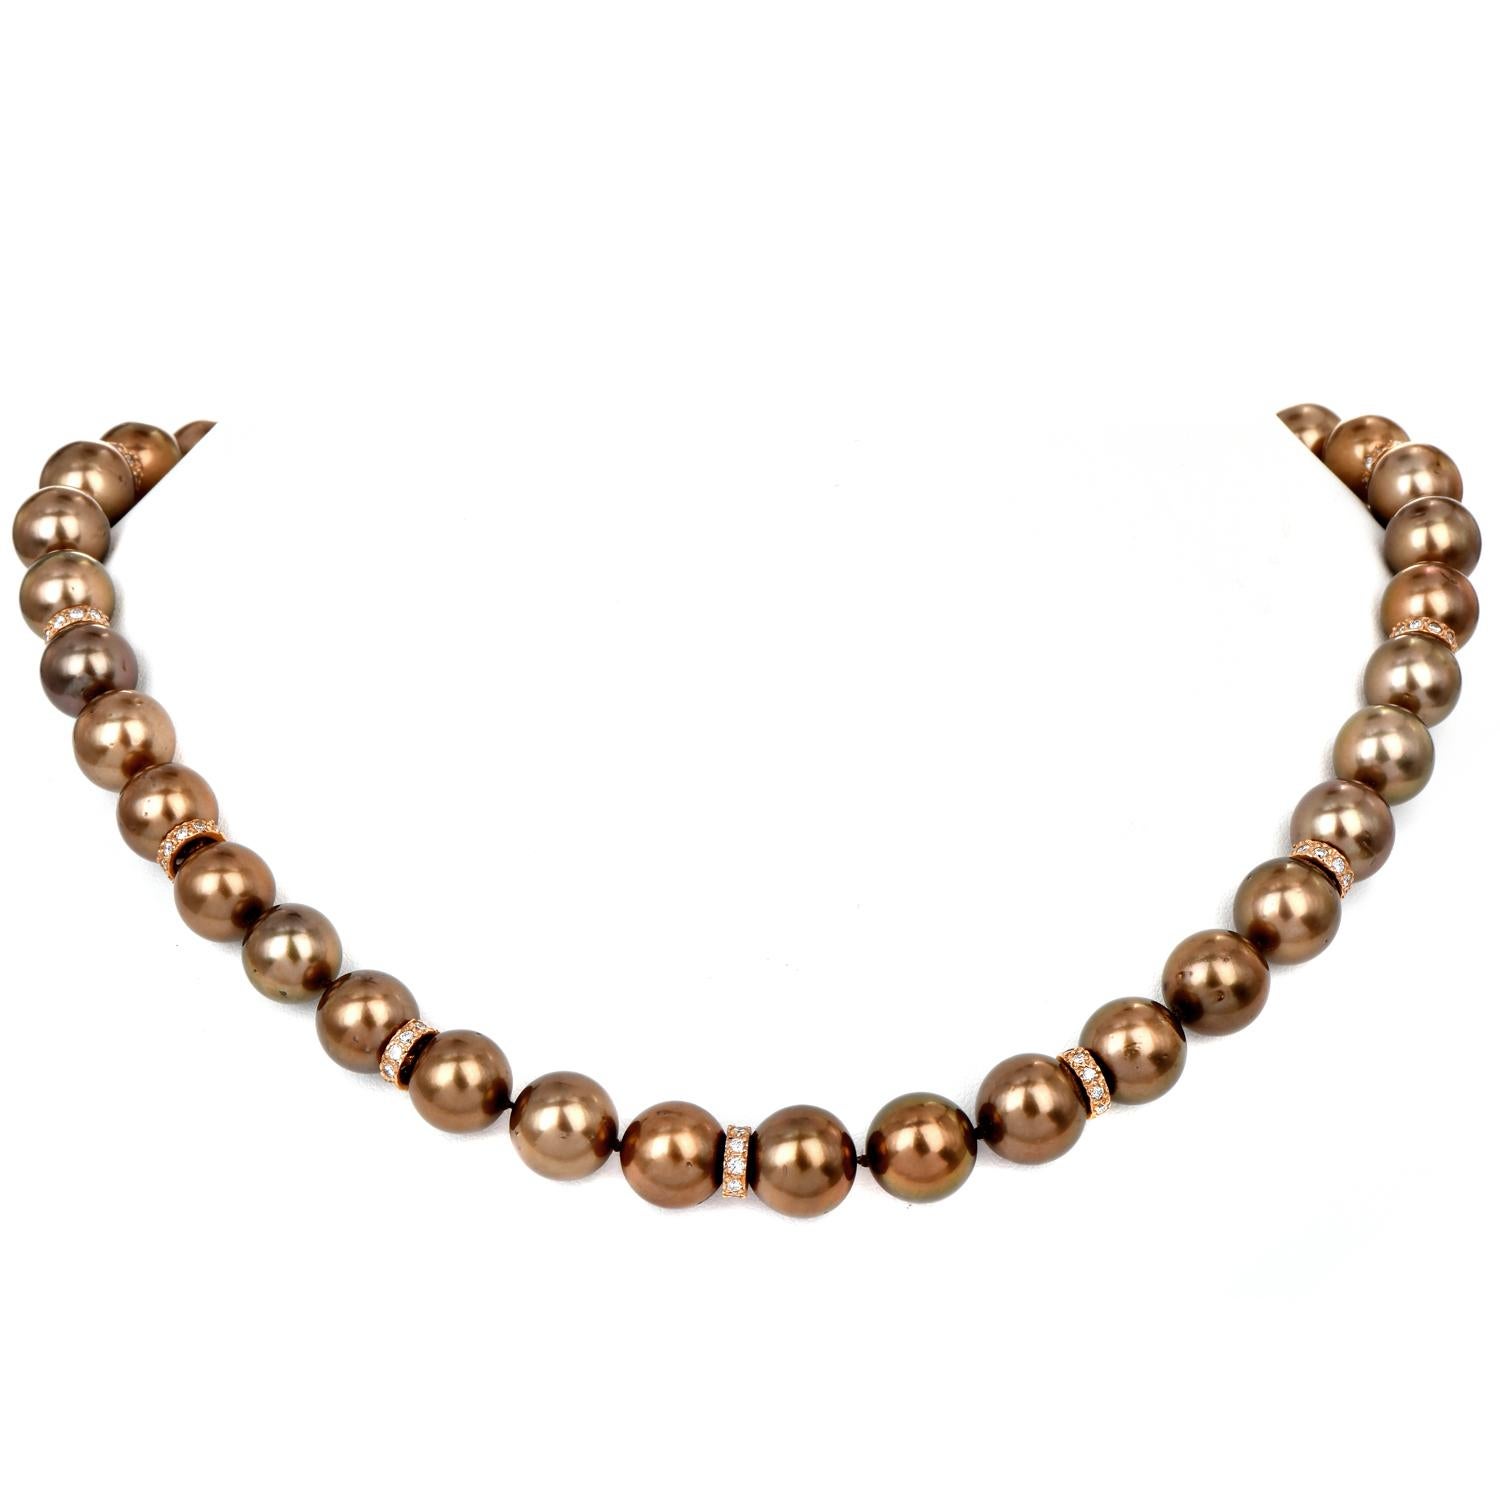 Indulge in the opulence of our Tahitian Brown Pearl Necklace, a true masterpiece of fine jewelry. The necklace features 10 links of 18K rose gold, with diamond accents every 3 pearls, creating an exquisite visual pattern that enhances the natural